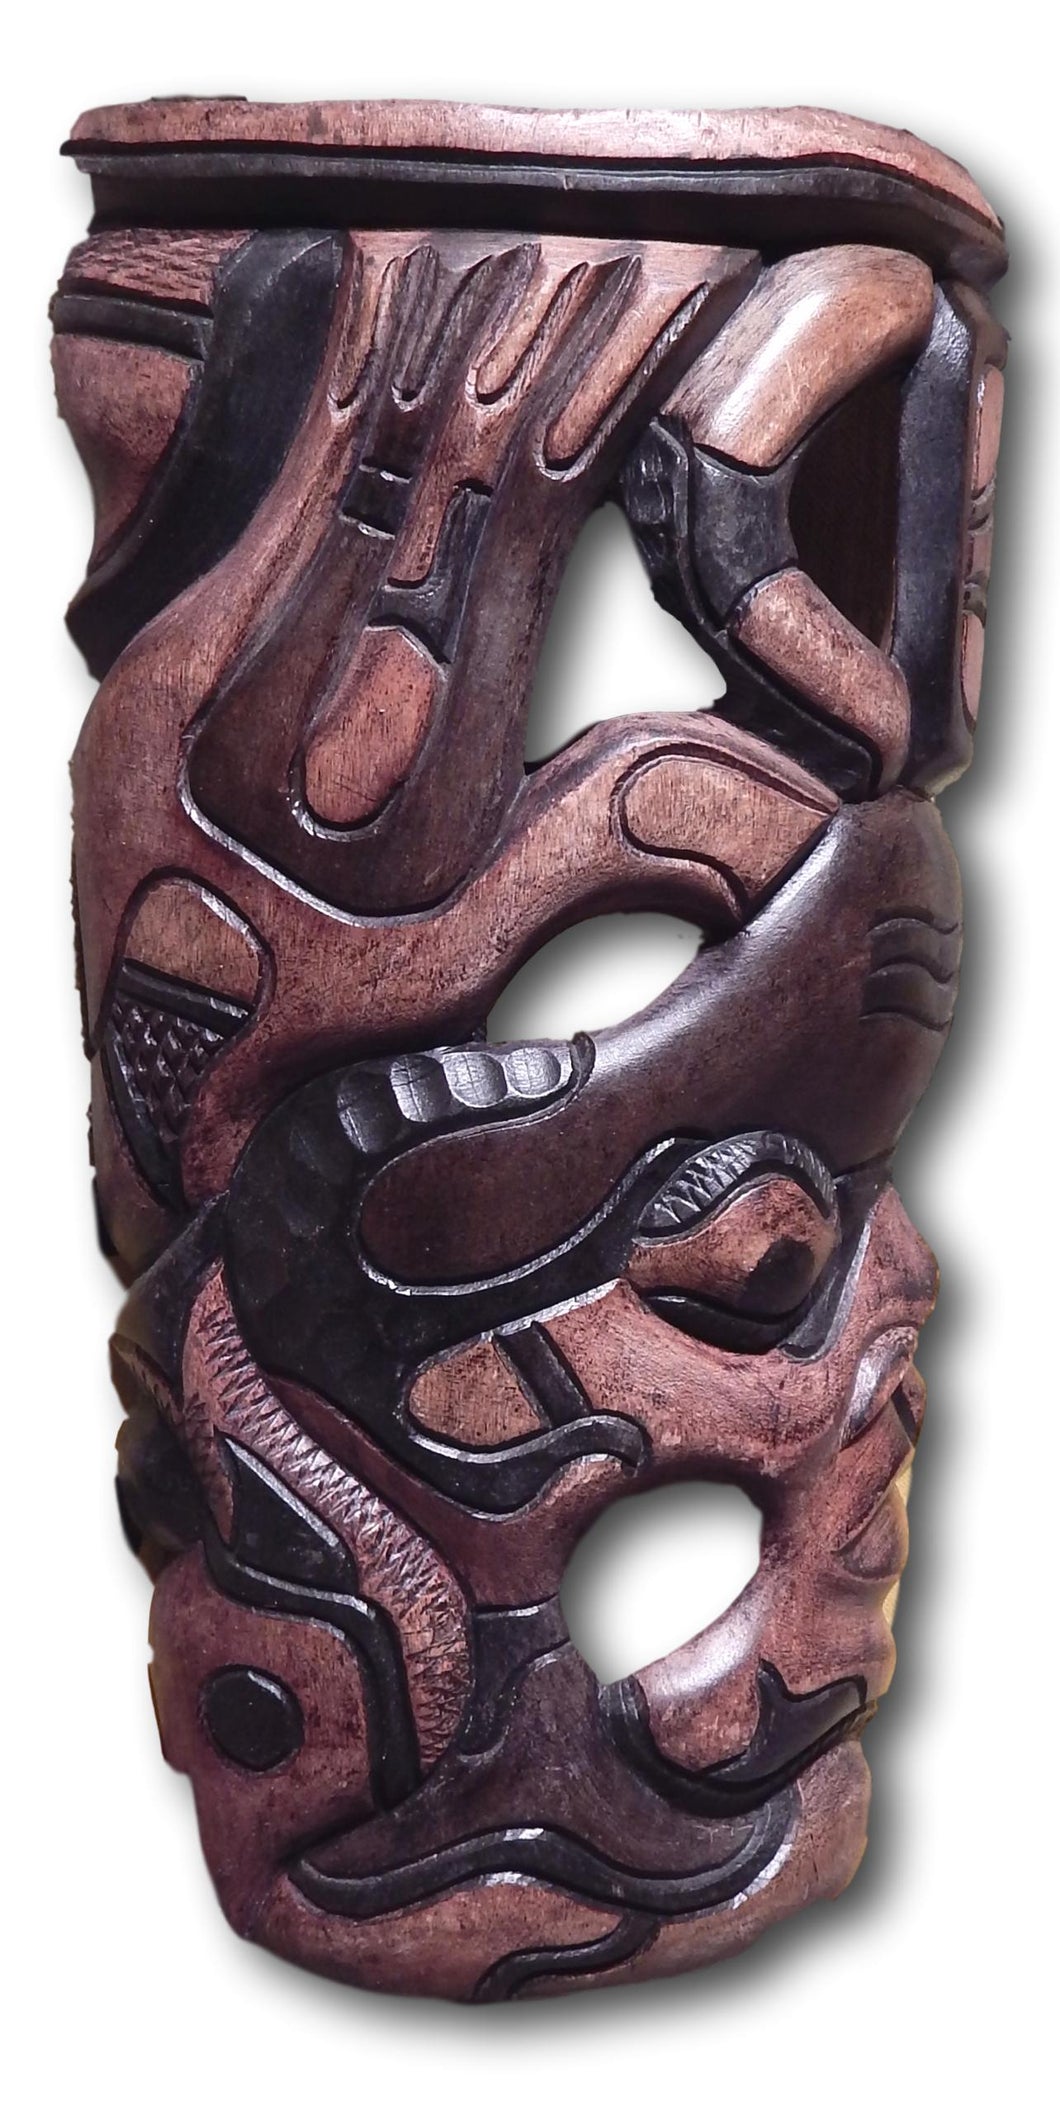 Mask art decoration handcrafted from Seringa wood